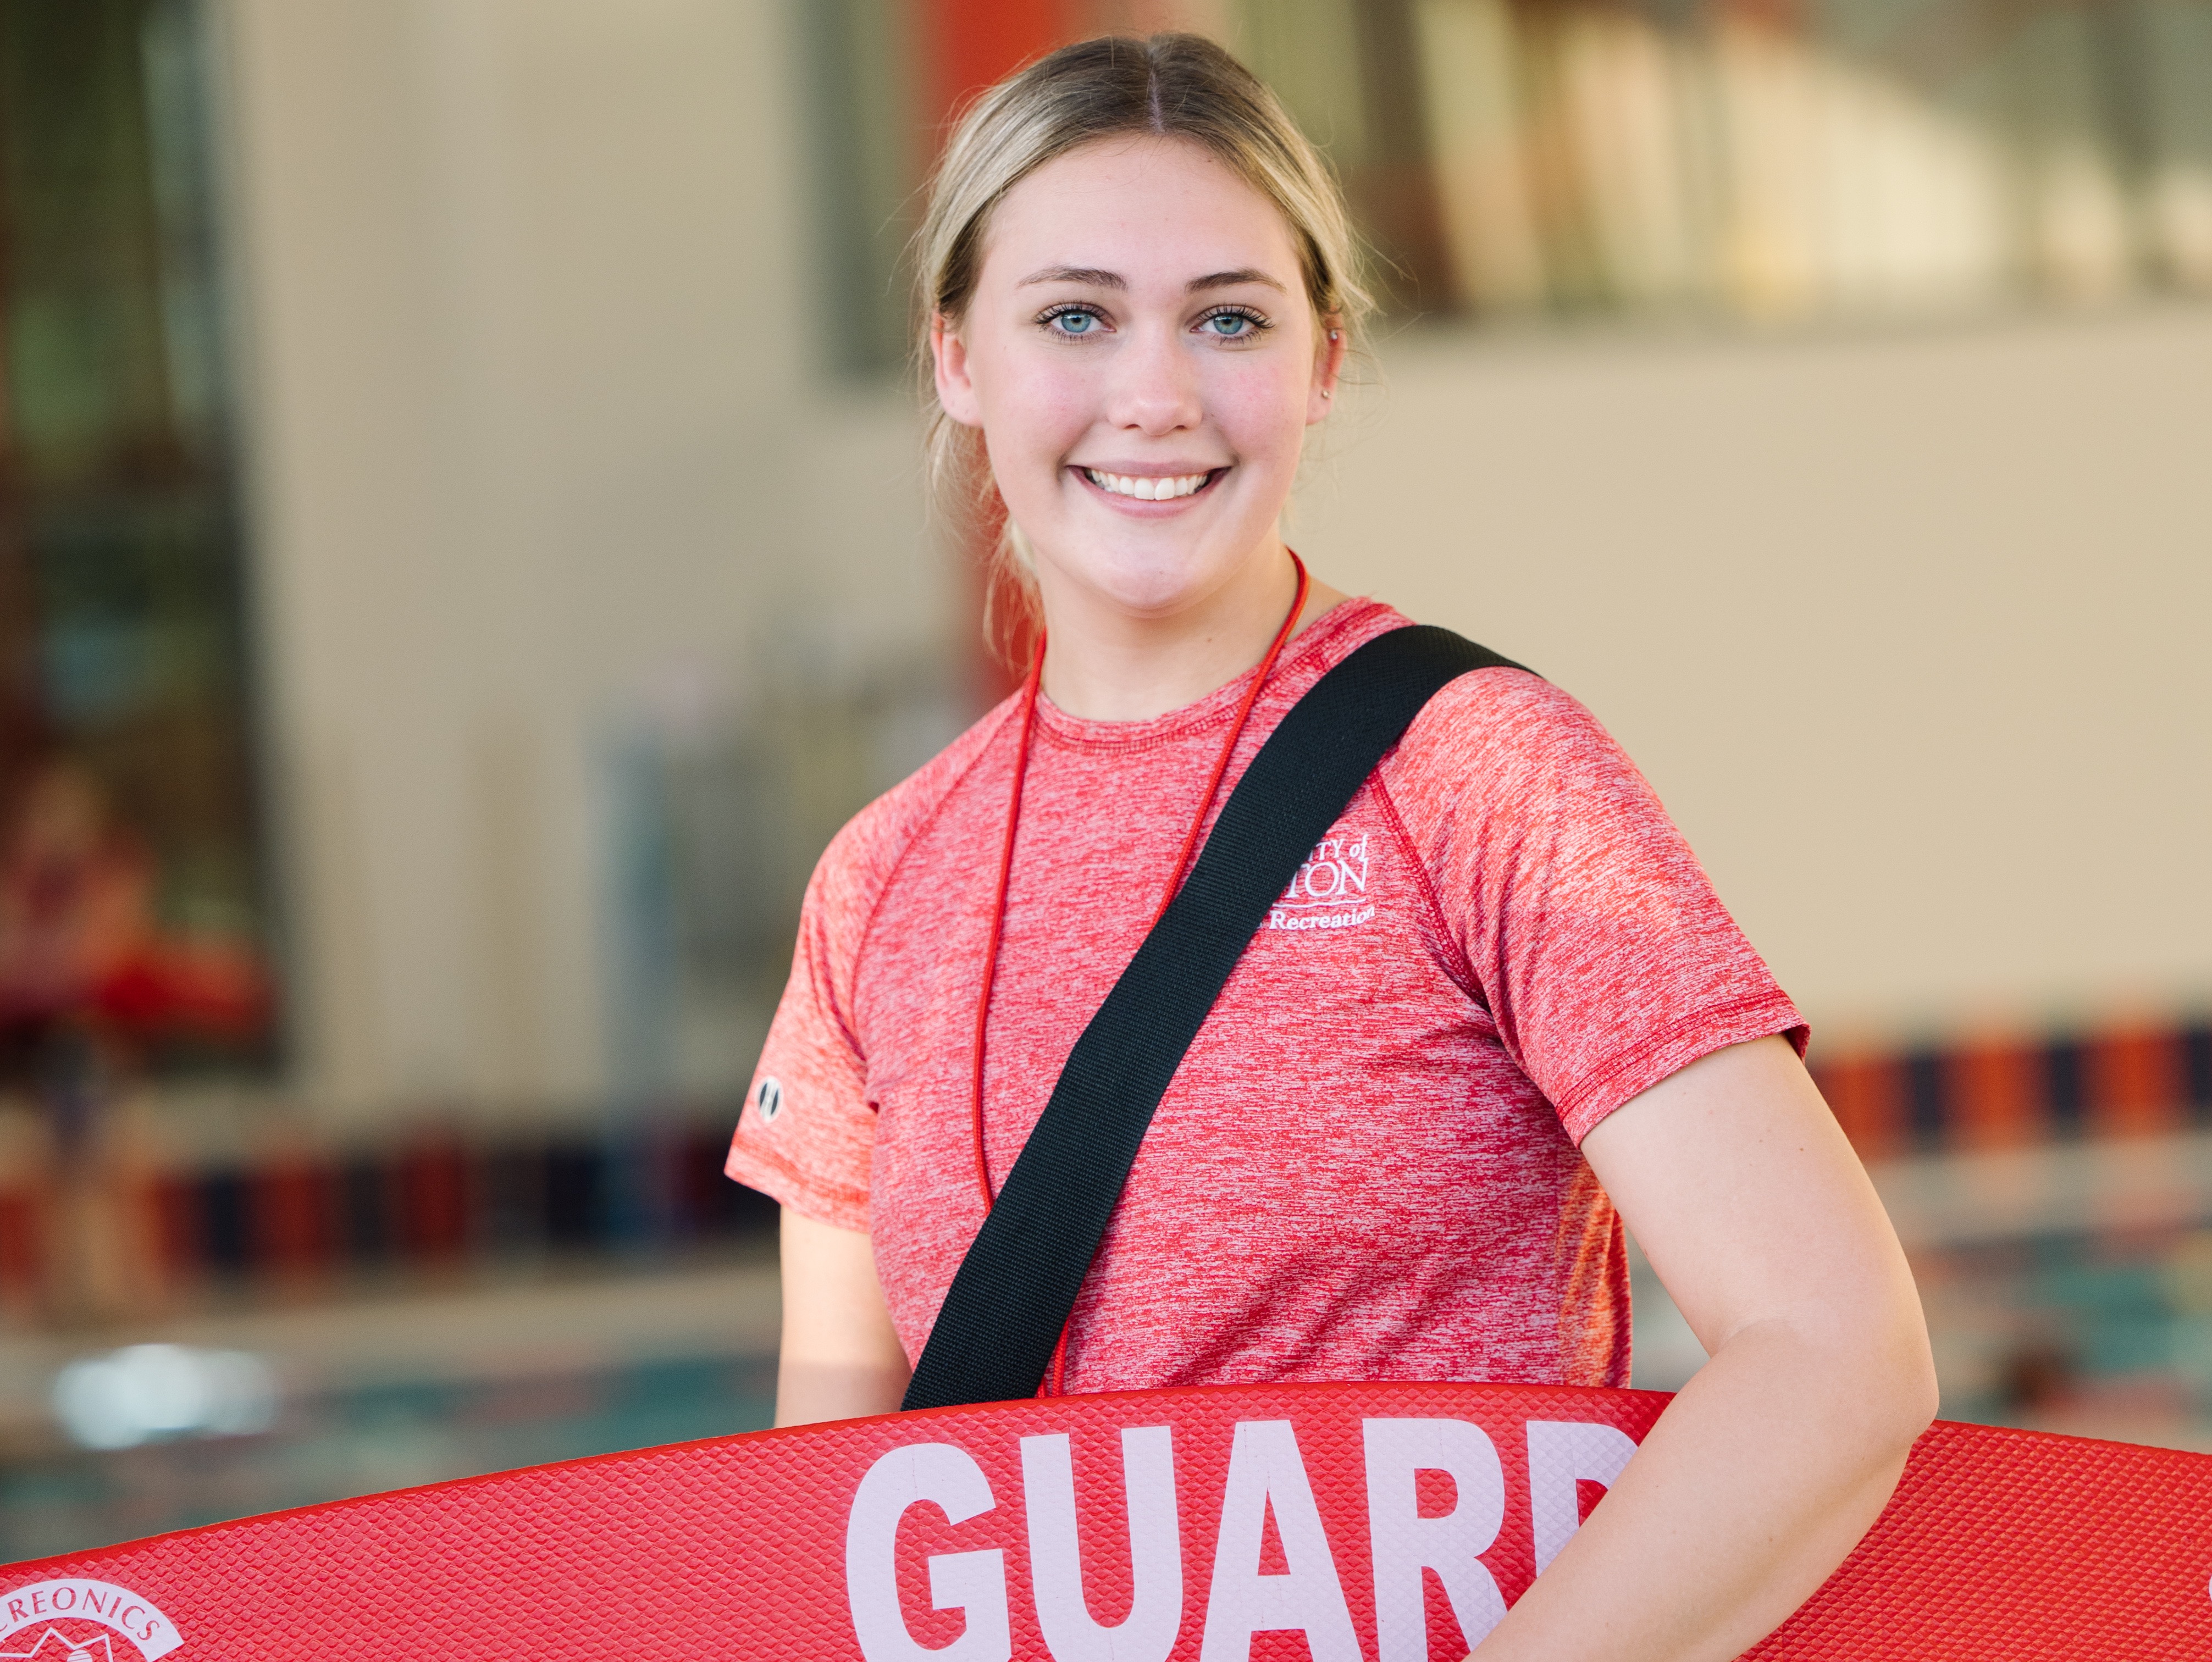 A student lifeguard in the aquatics center smiling on shift.